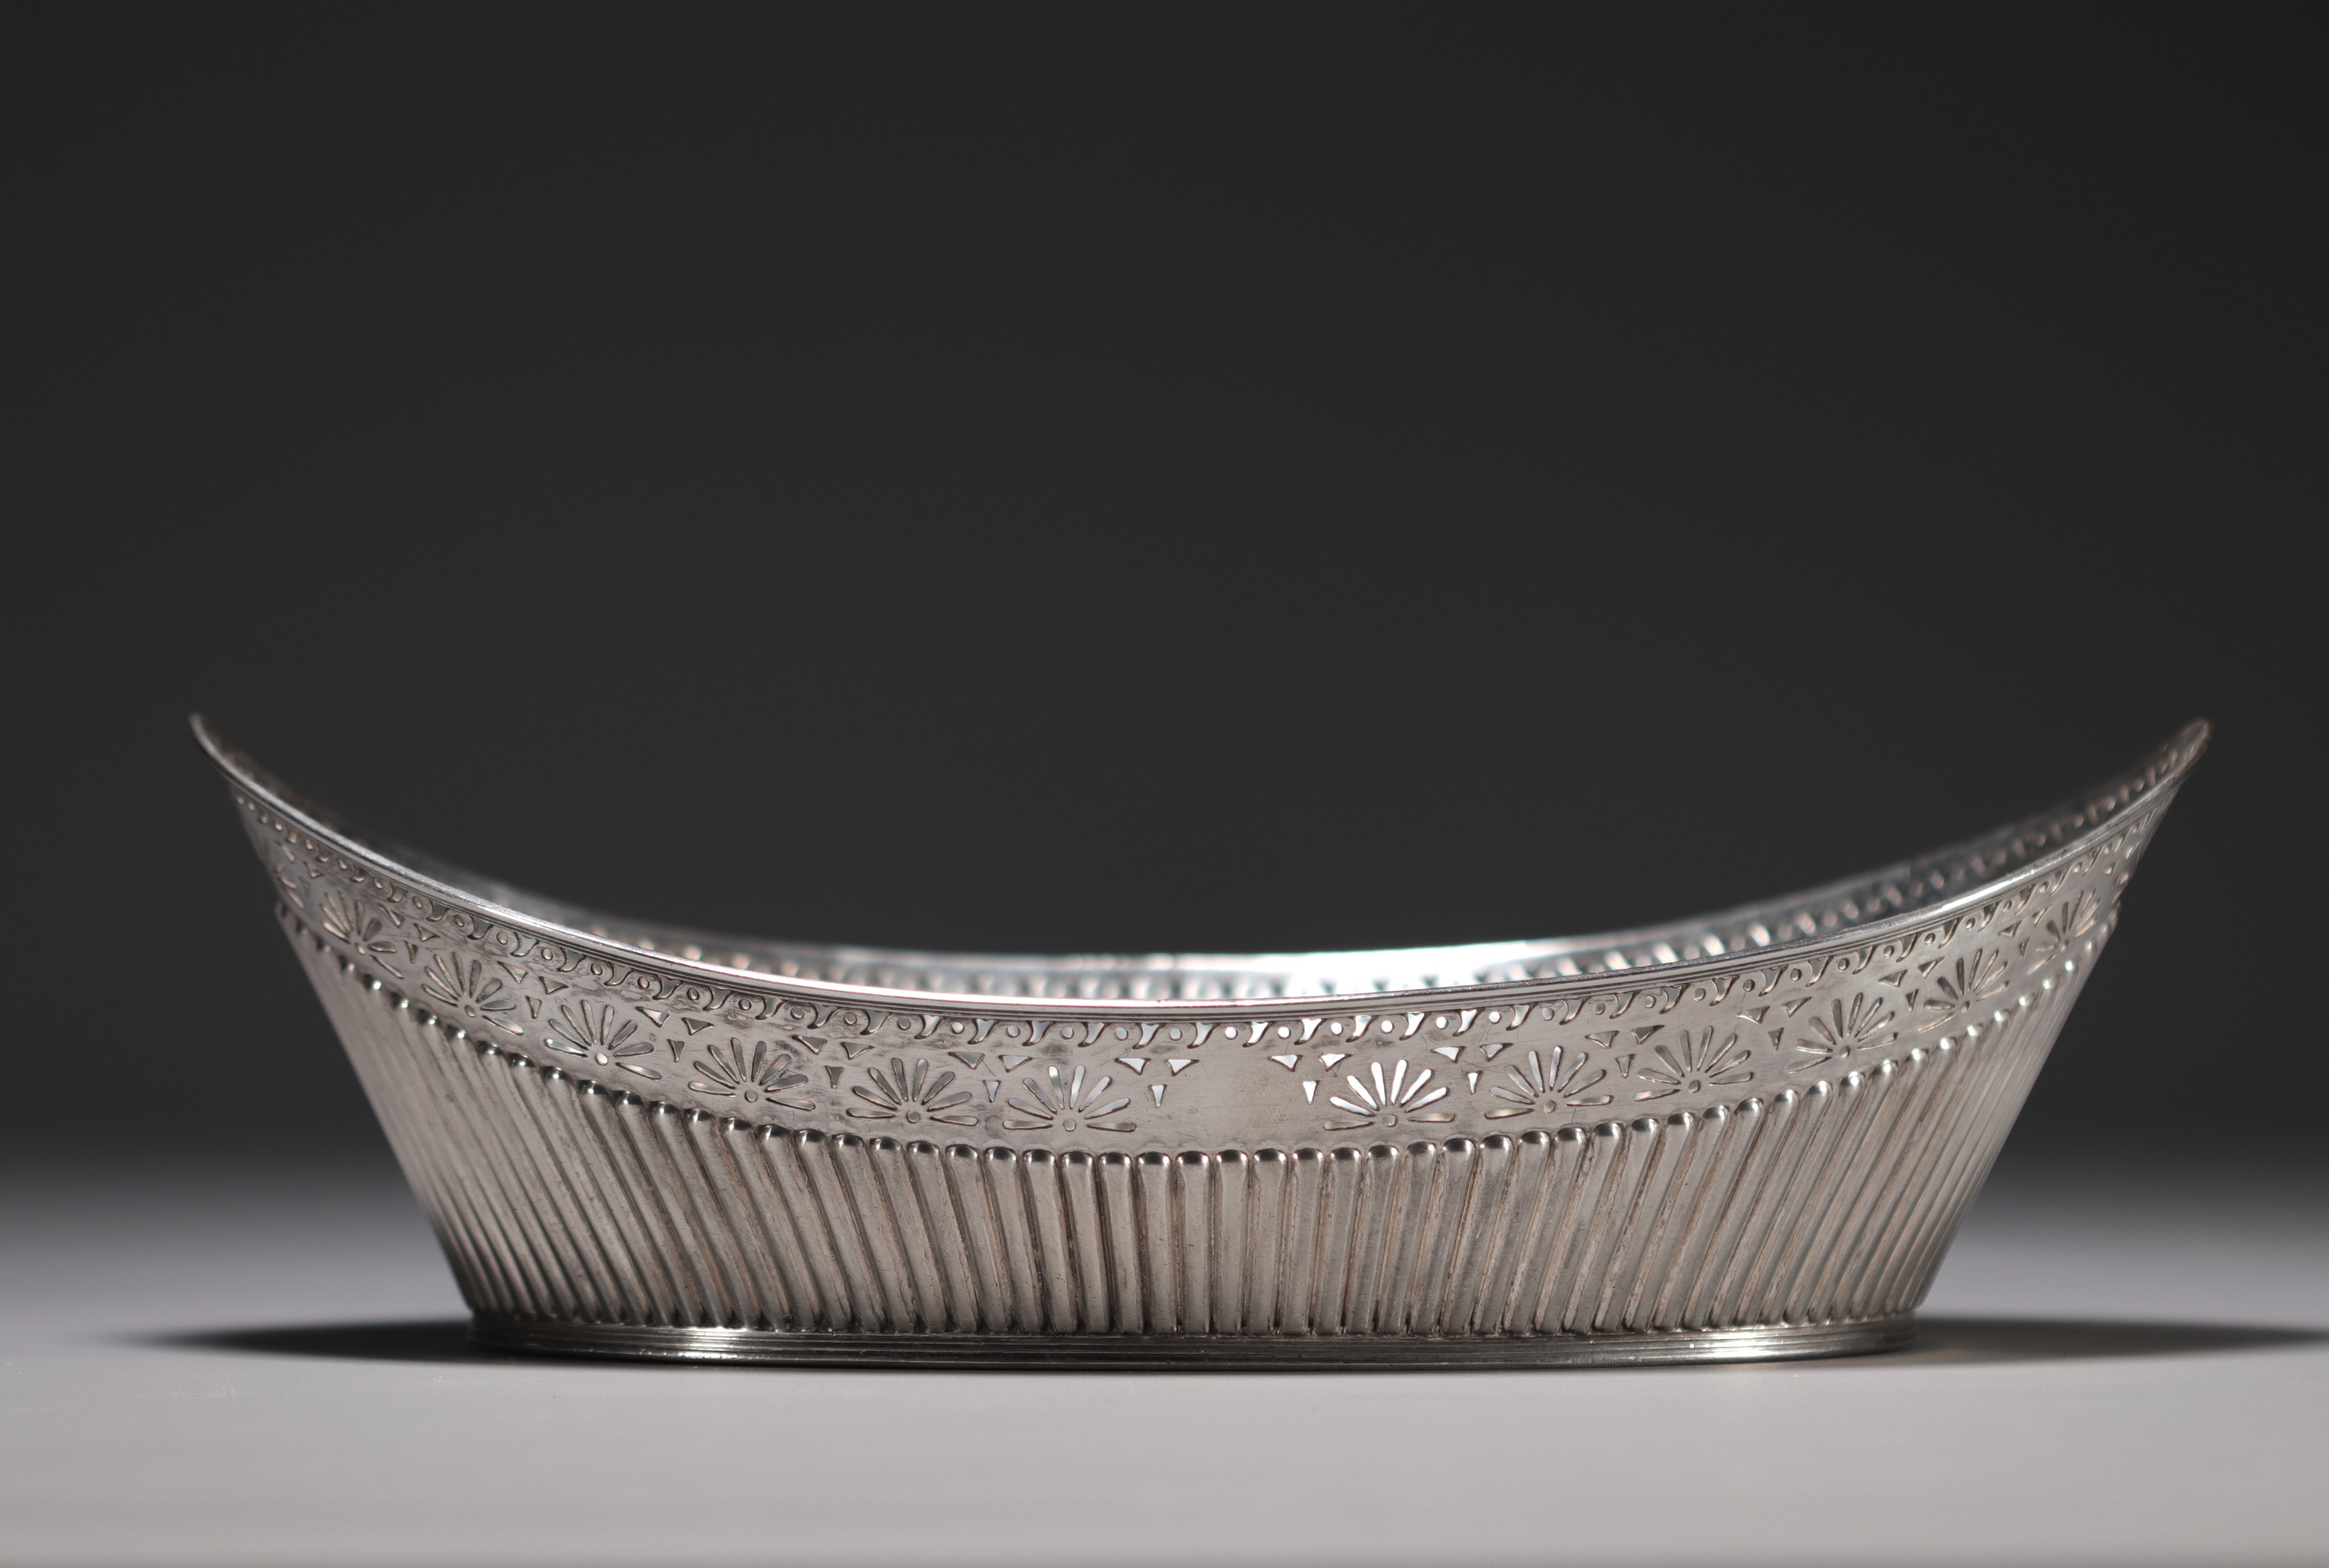 Bread basket in solid silver, hallmarked JD&S. - Image 6 of 6